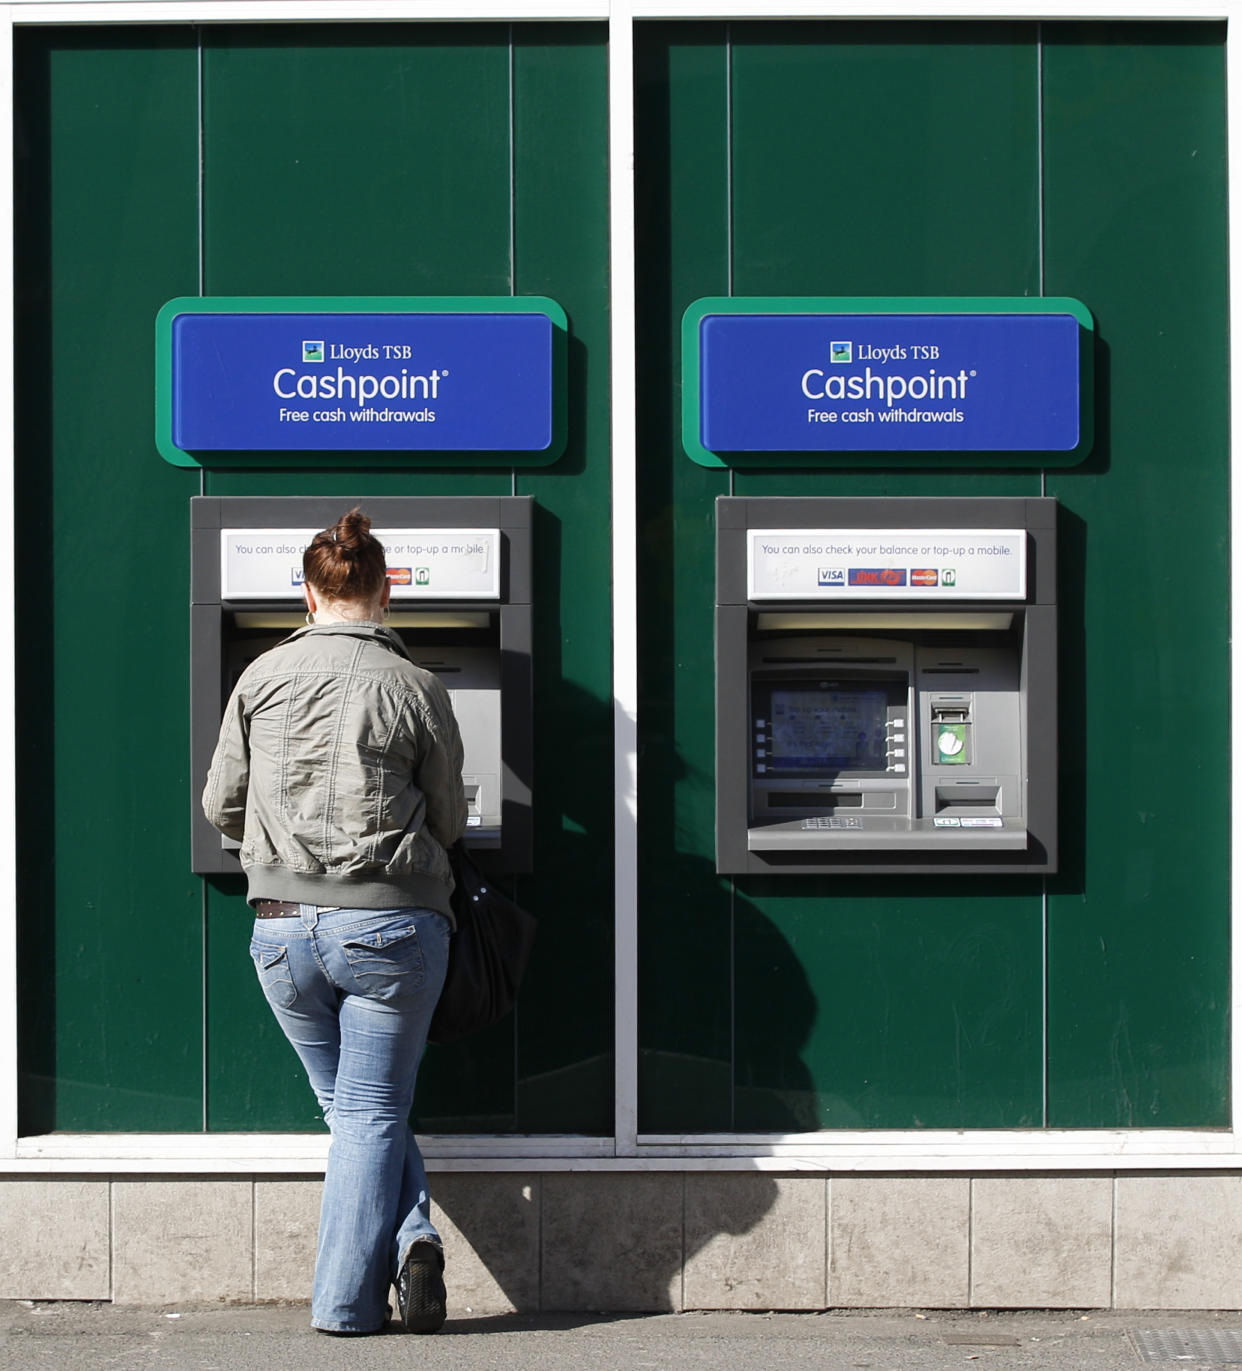 A woman uses a Lloyds TSB Cashpoint machine in Loughborough, central England April 27, 2010.  Lloyds Banking Group returned to profit in the first three months of this year, earlier than expected, as losses on both retail and commercial bad debts for Britain's largest bank continue to fall.  REUTERS/Darren Staples   (BRITAIN - Tags: BUSINESS)